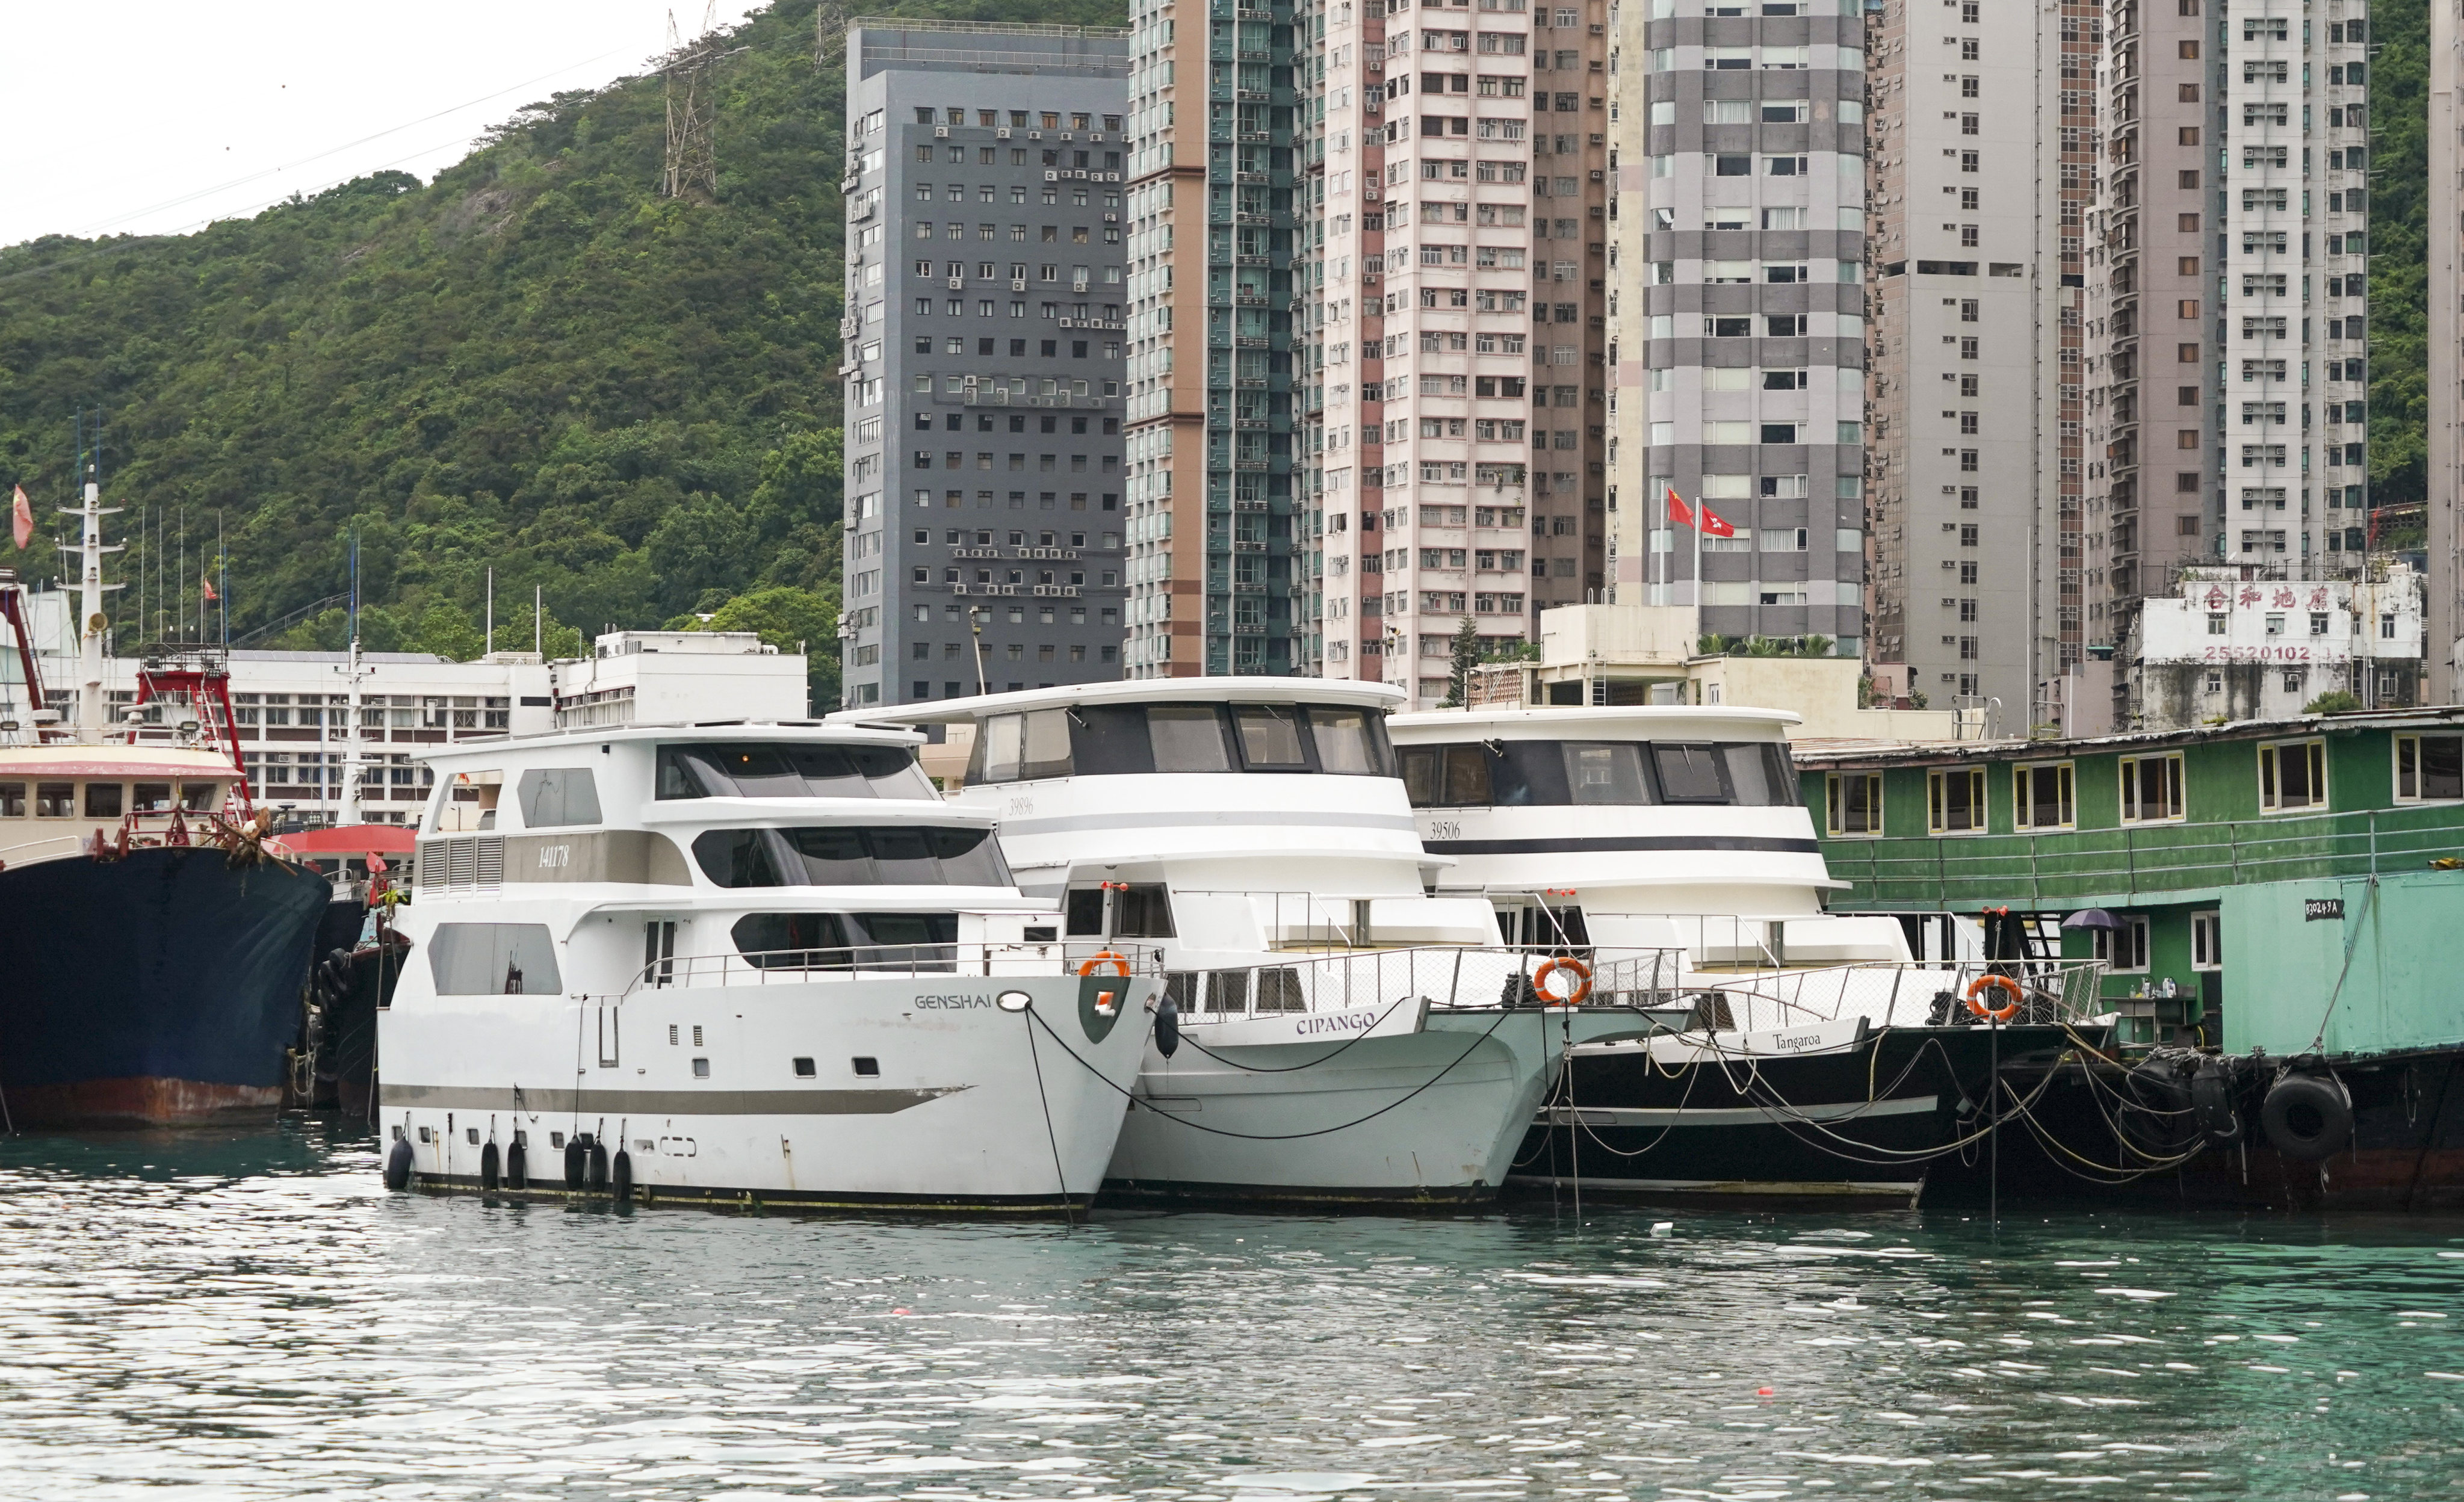 Controversy over the use of houseboats as guest houses was ignited this week when authorities were accused of not doing enough to stop the “rampant illegal business”. Photo: Felix Wong